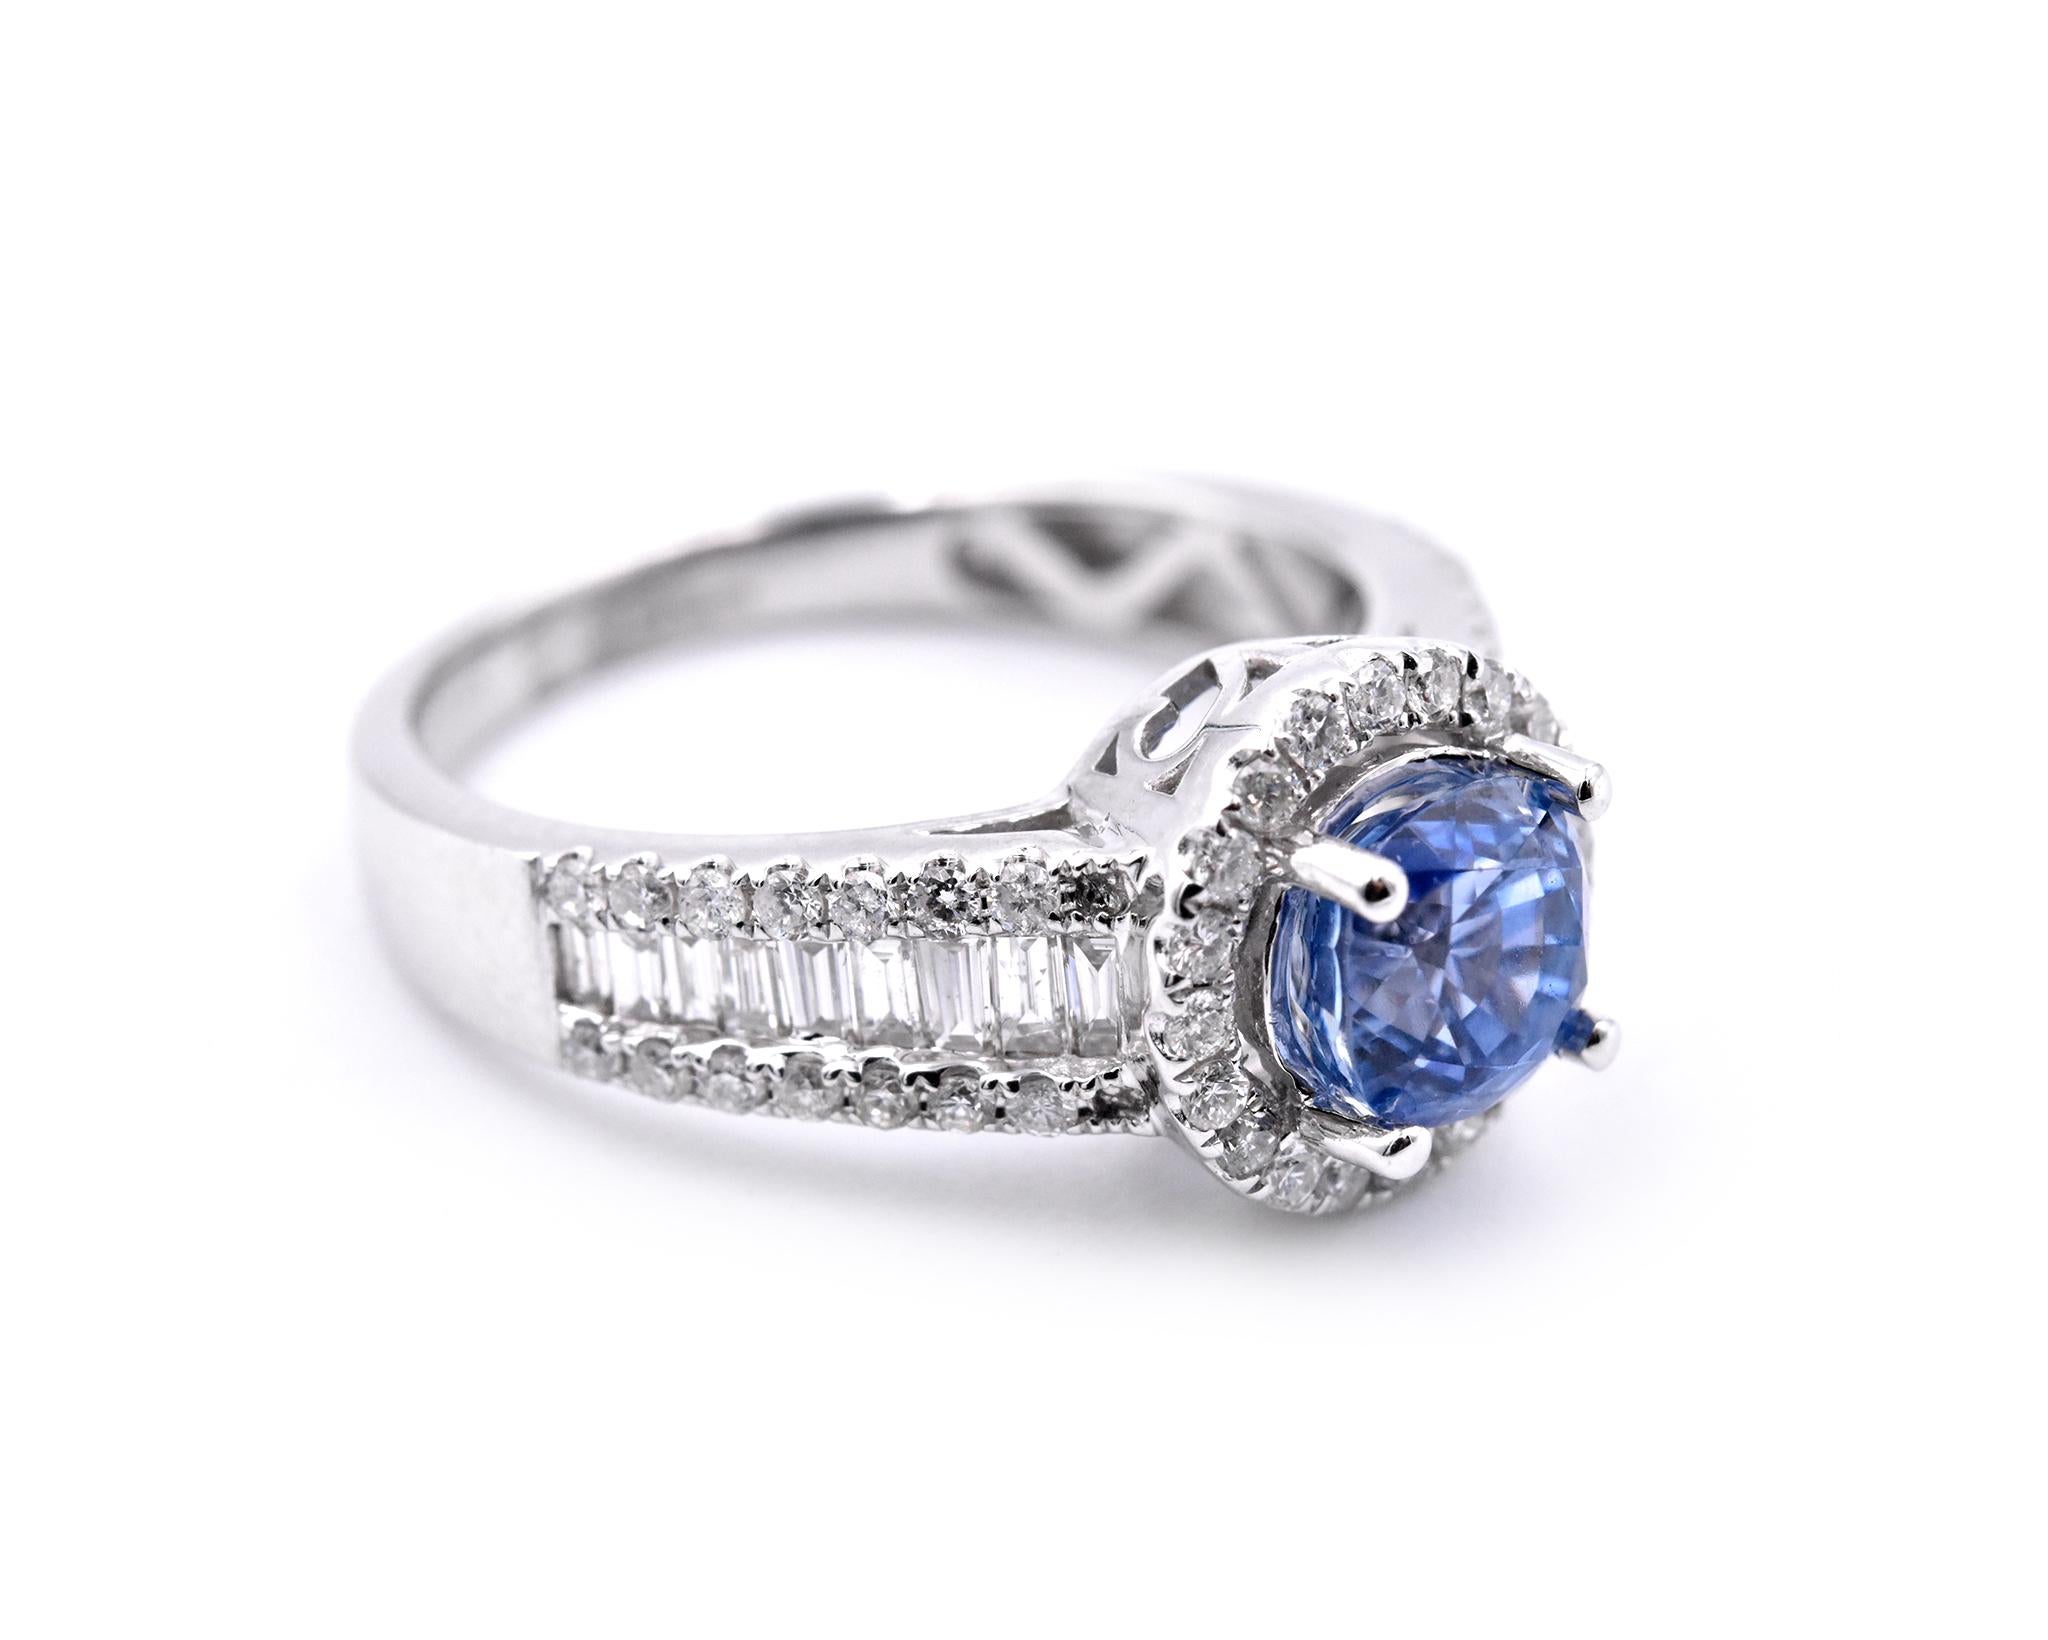 Designer: custom design
Material: 14k white gold
Gemstones: Ceylon Sapphire = 1.57ct
Certification: AGI 25329
Diamonds: 63 round brilliant cuts = .92cttw
Color: F
Clarity: VS2-SI
Ring Size: 7.5 (please allow two additional shipping days for sizing